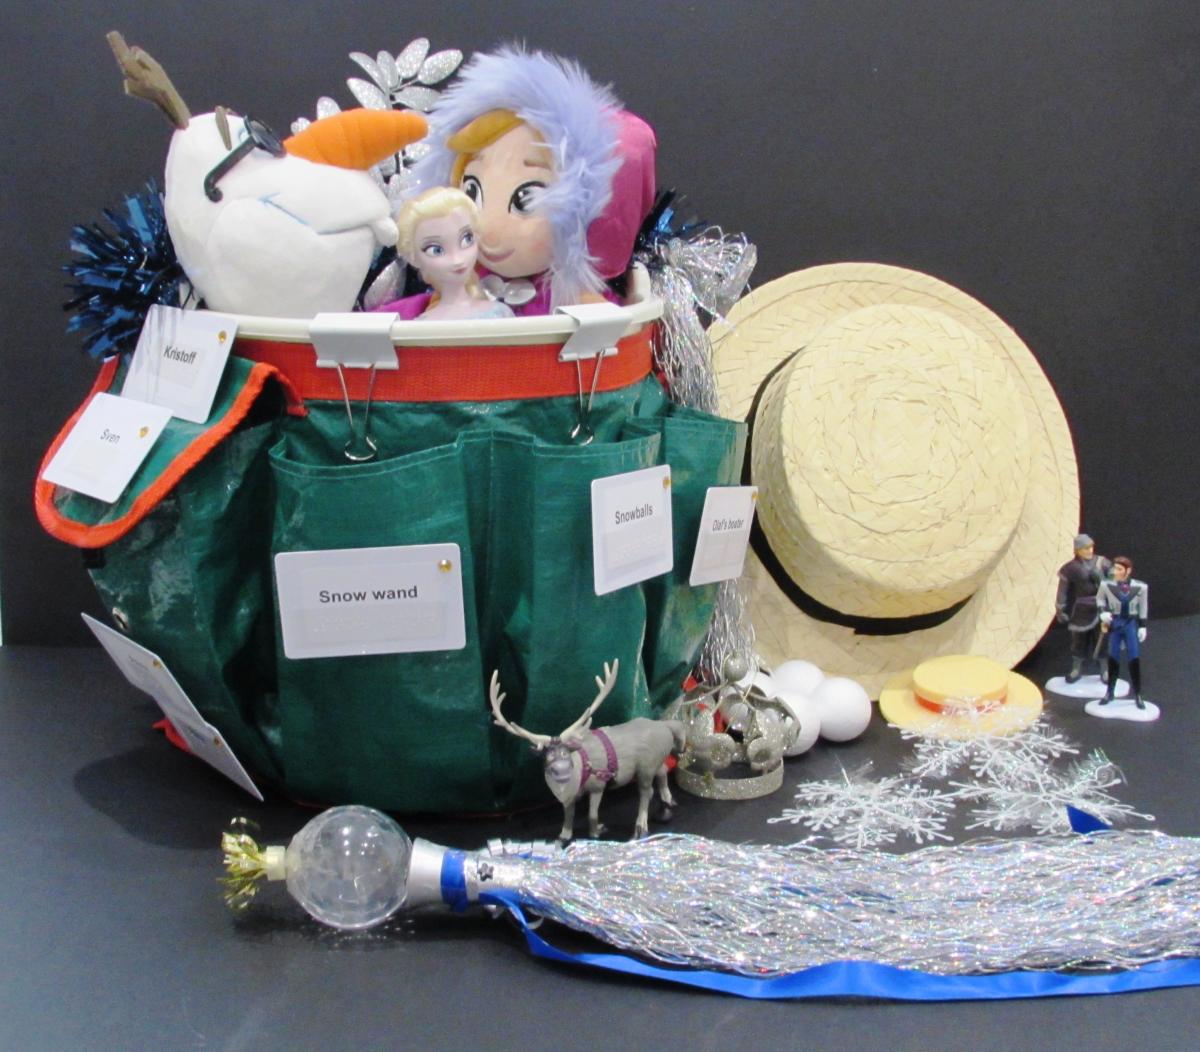 Bucket full of characters and materials for Frozen activity